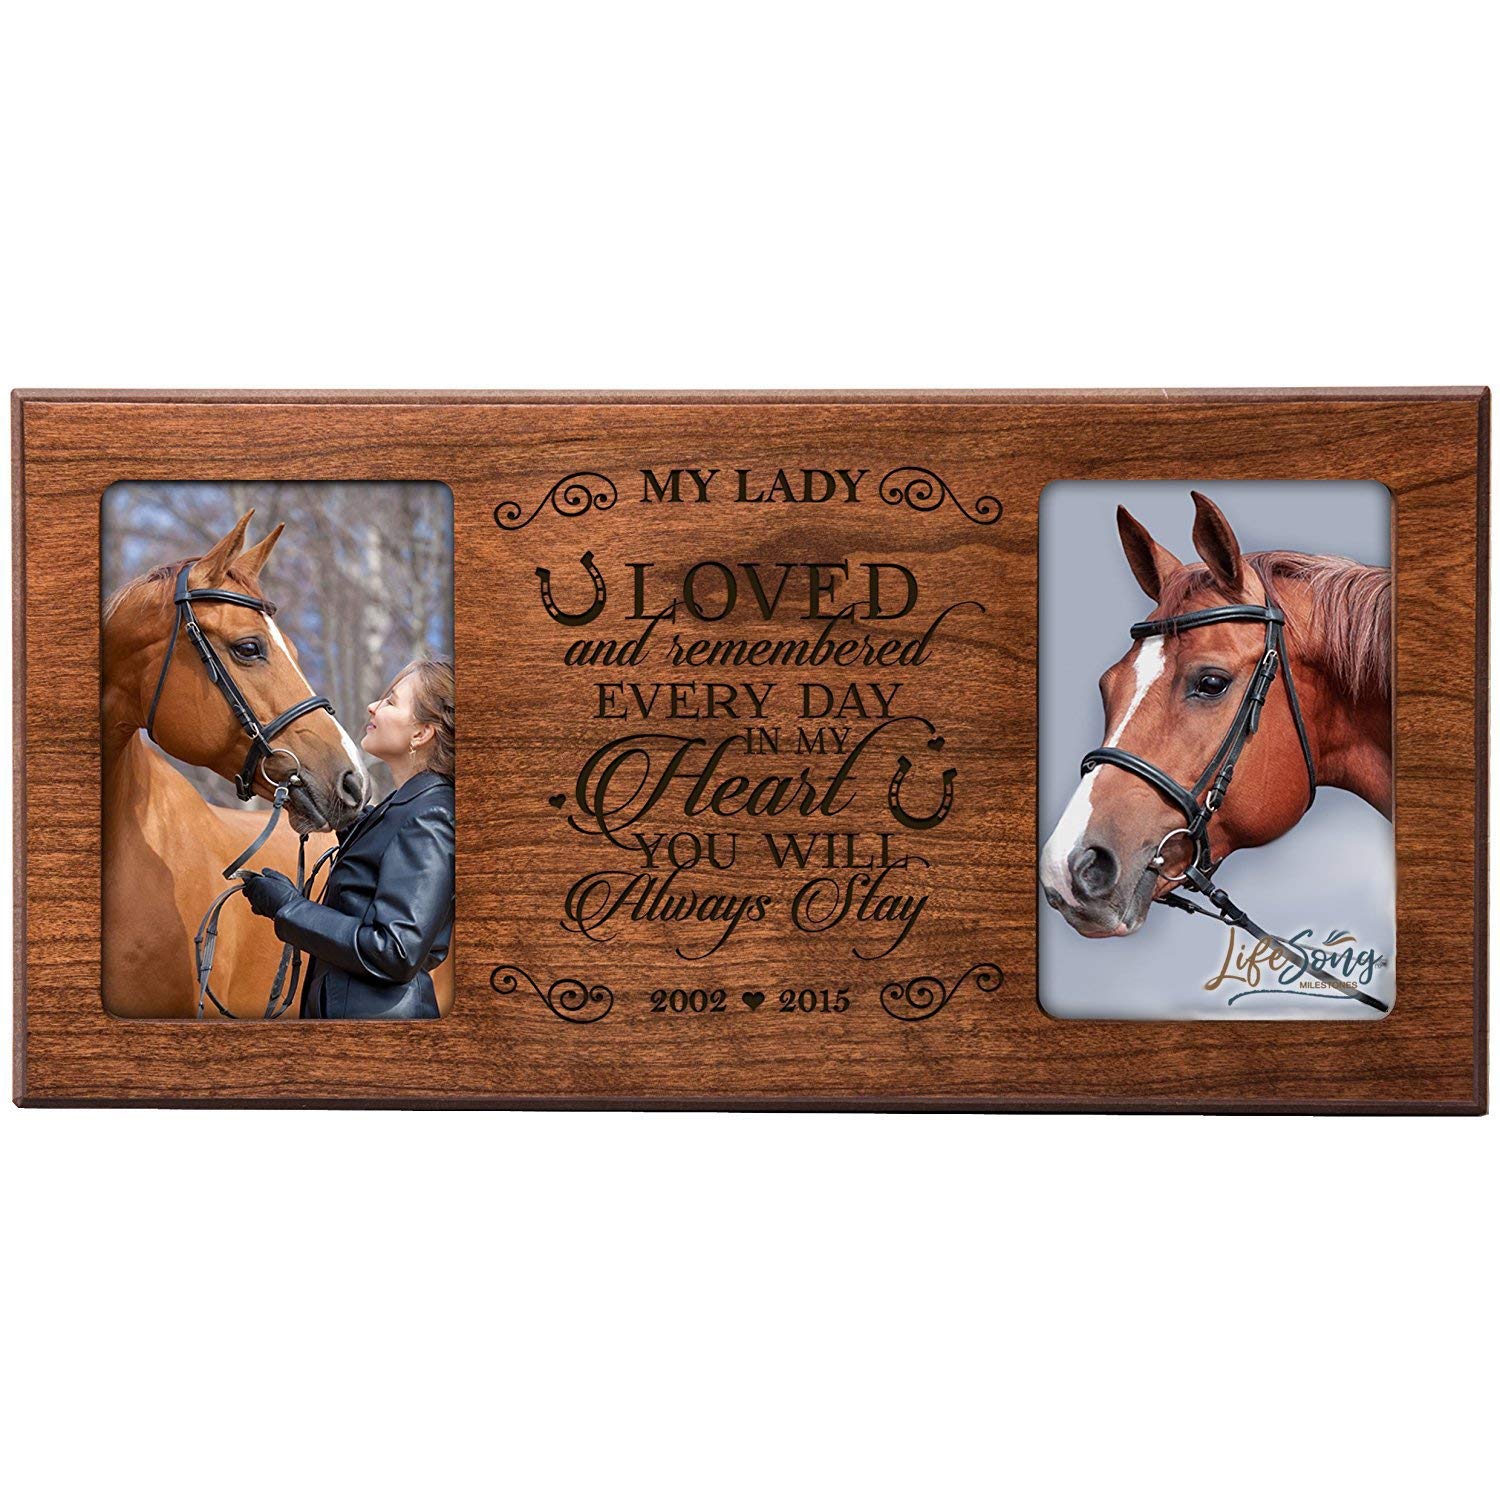 Custom Wooden Memorial Horse Picture Frame holds 2-4x6 photo - Loved And Remembered Everyday - LifeSong Milestones